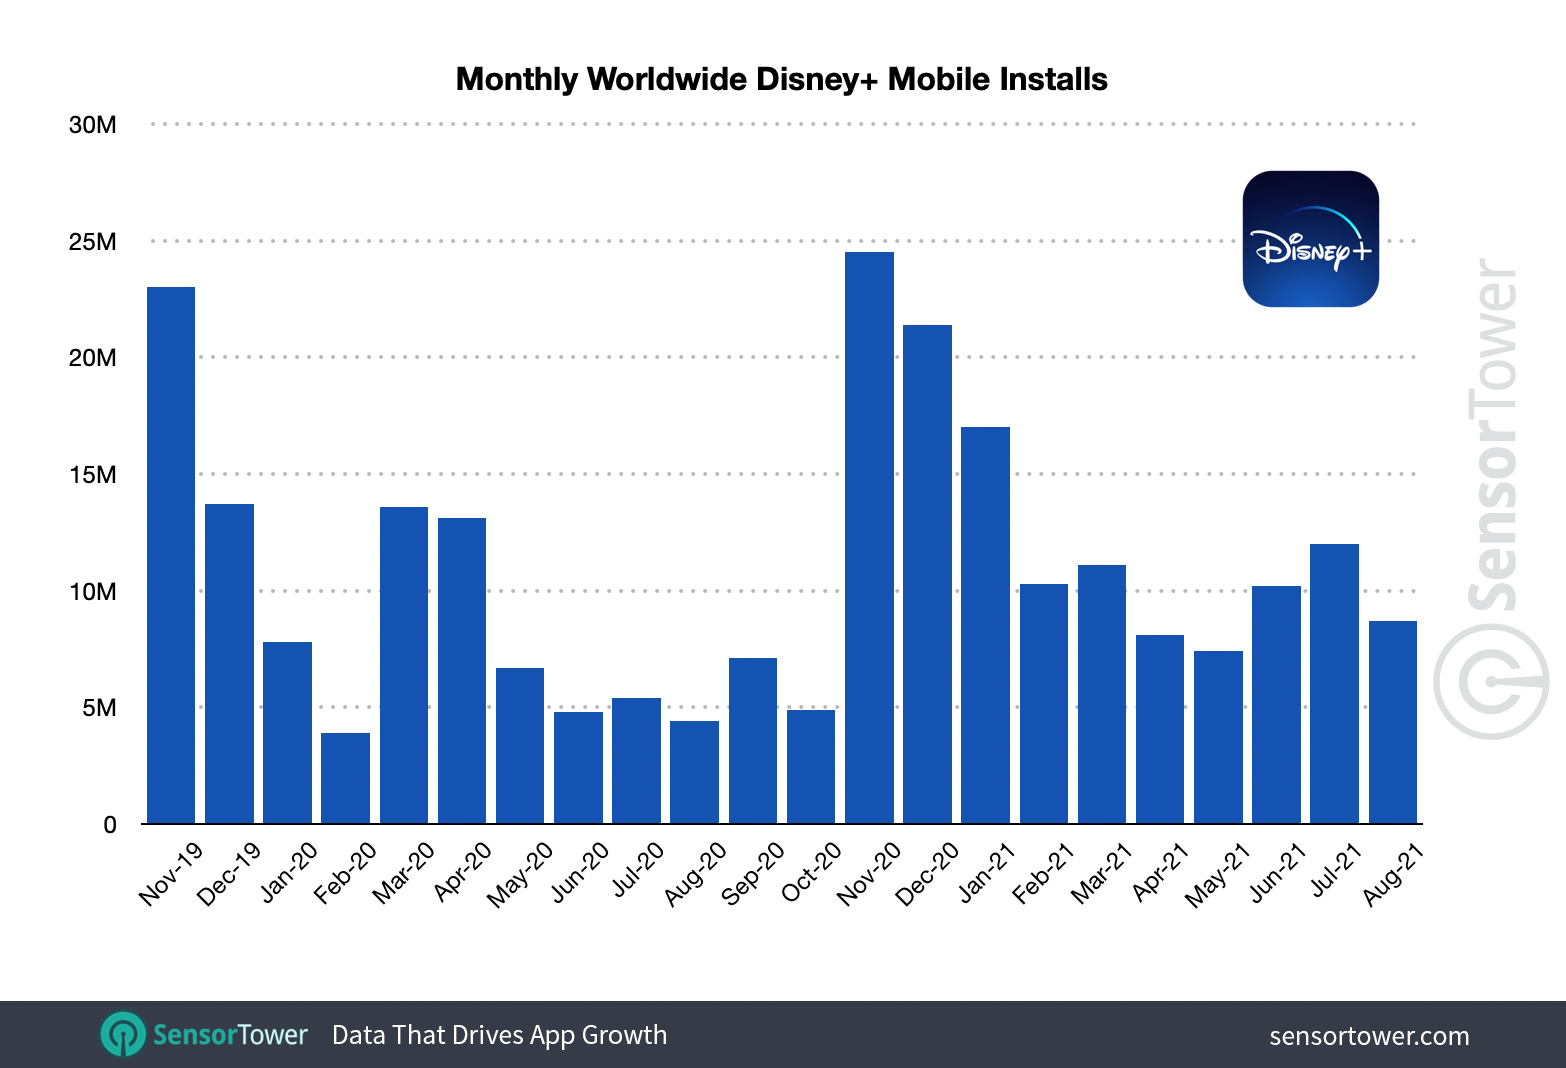 Disney+ has reached 246.7 million installs since its launch